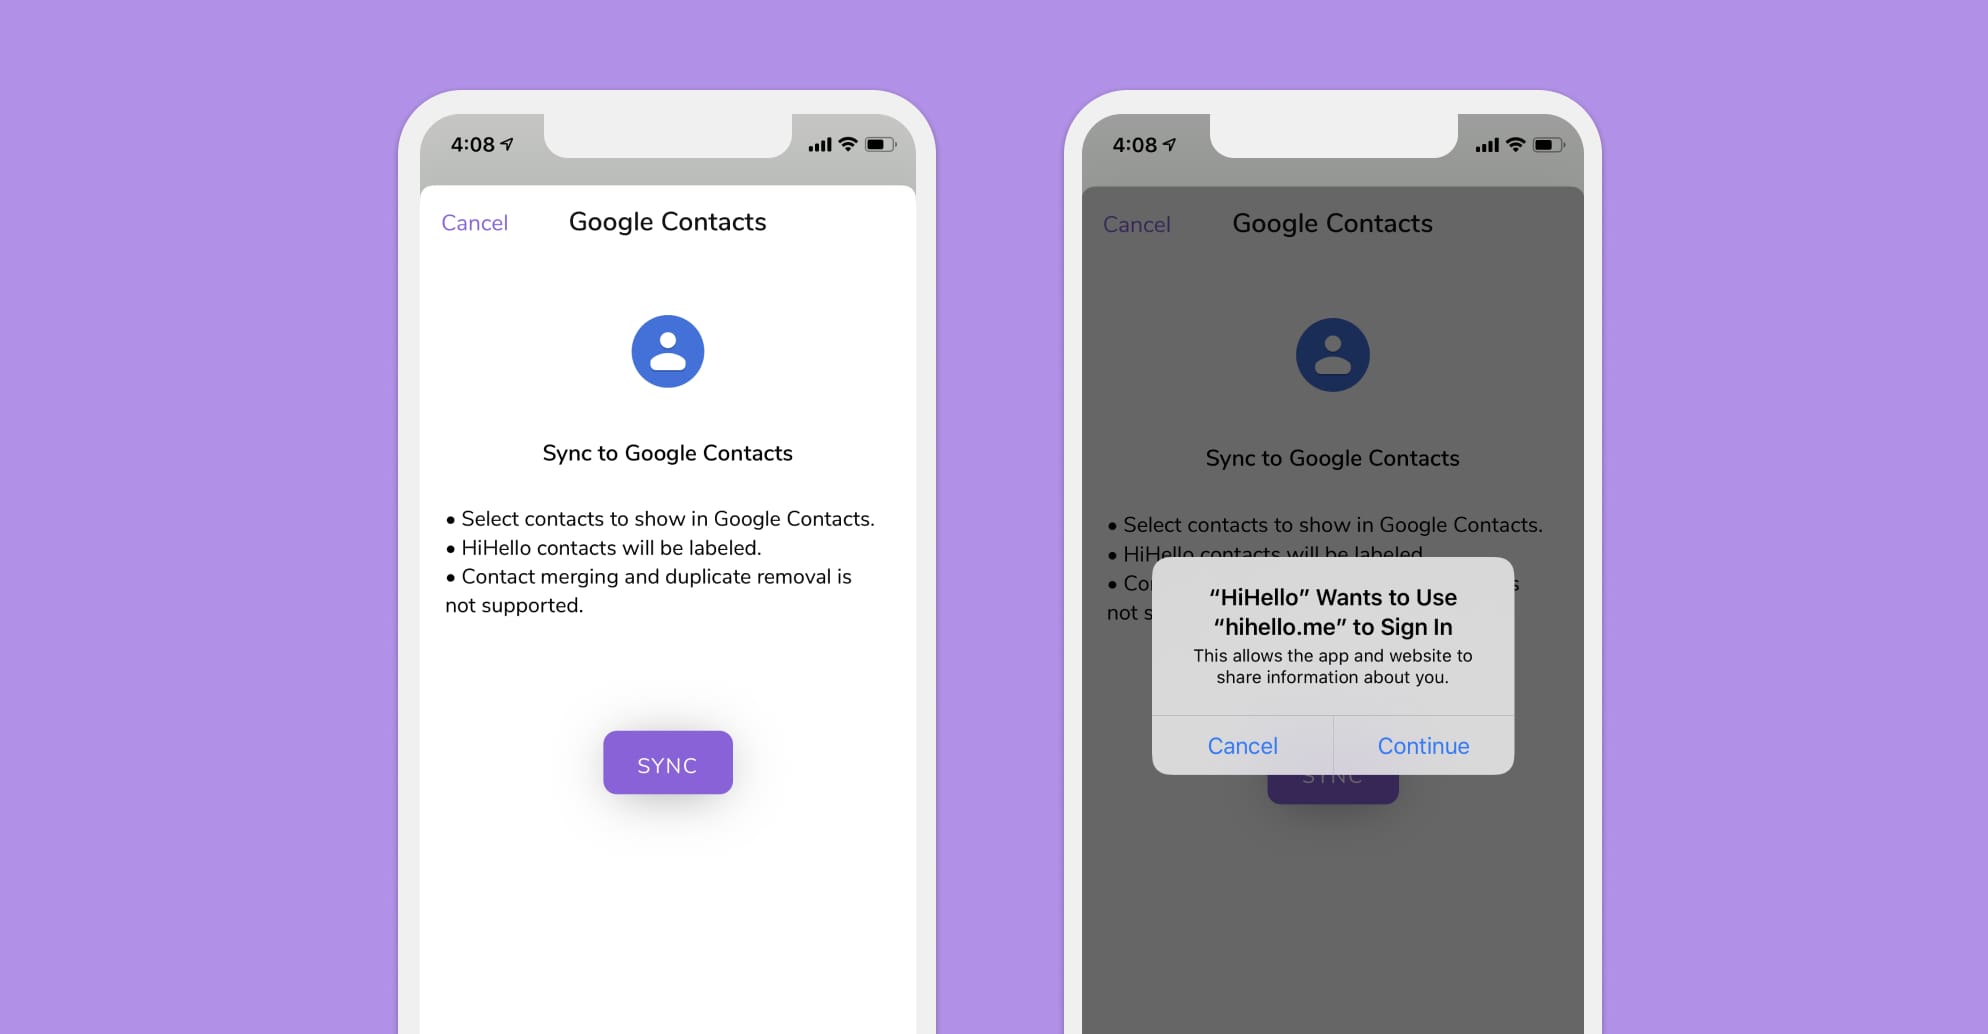 Sync HiHello with Google contacts and give HiHello permission to sign in to Google.